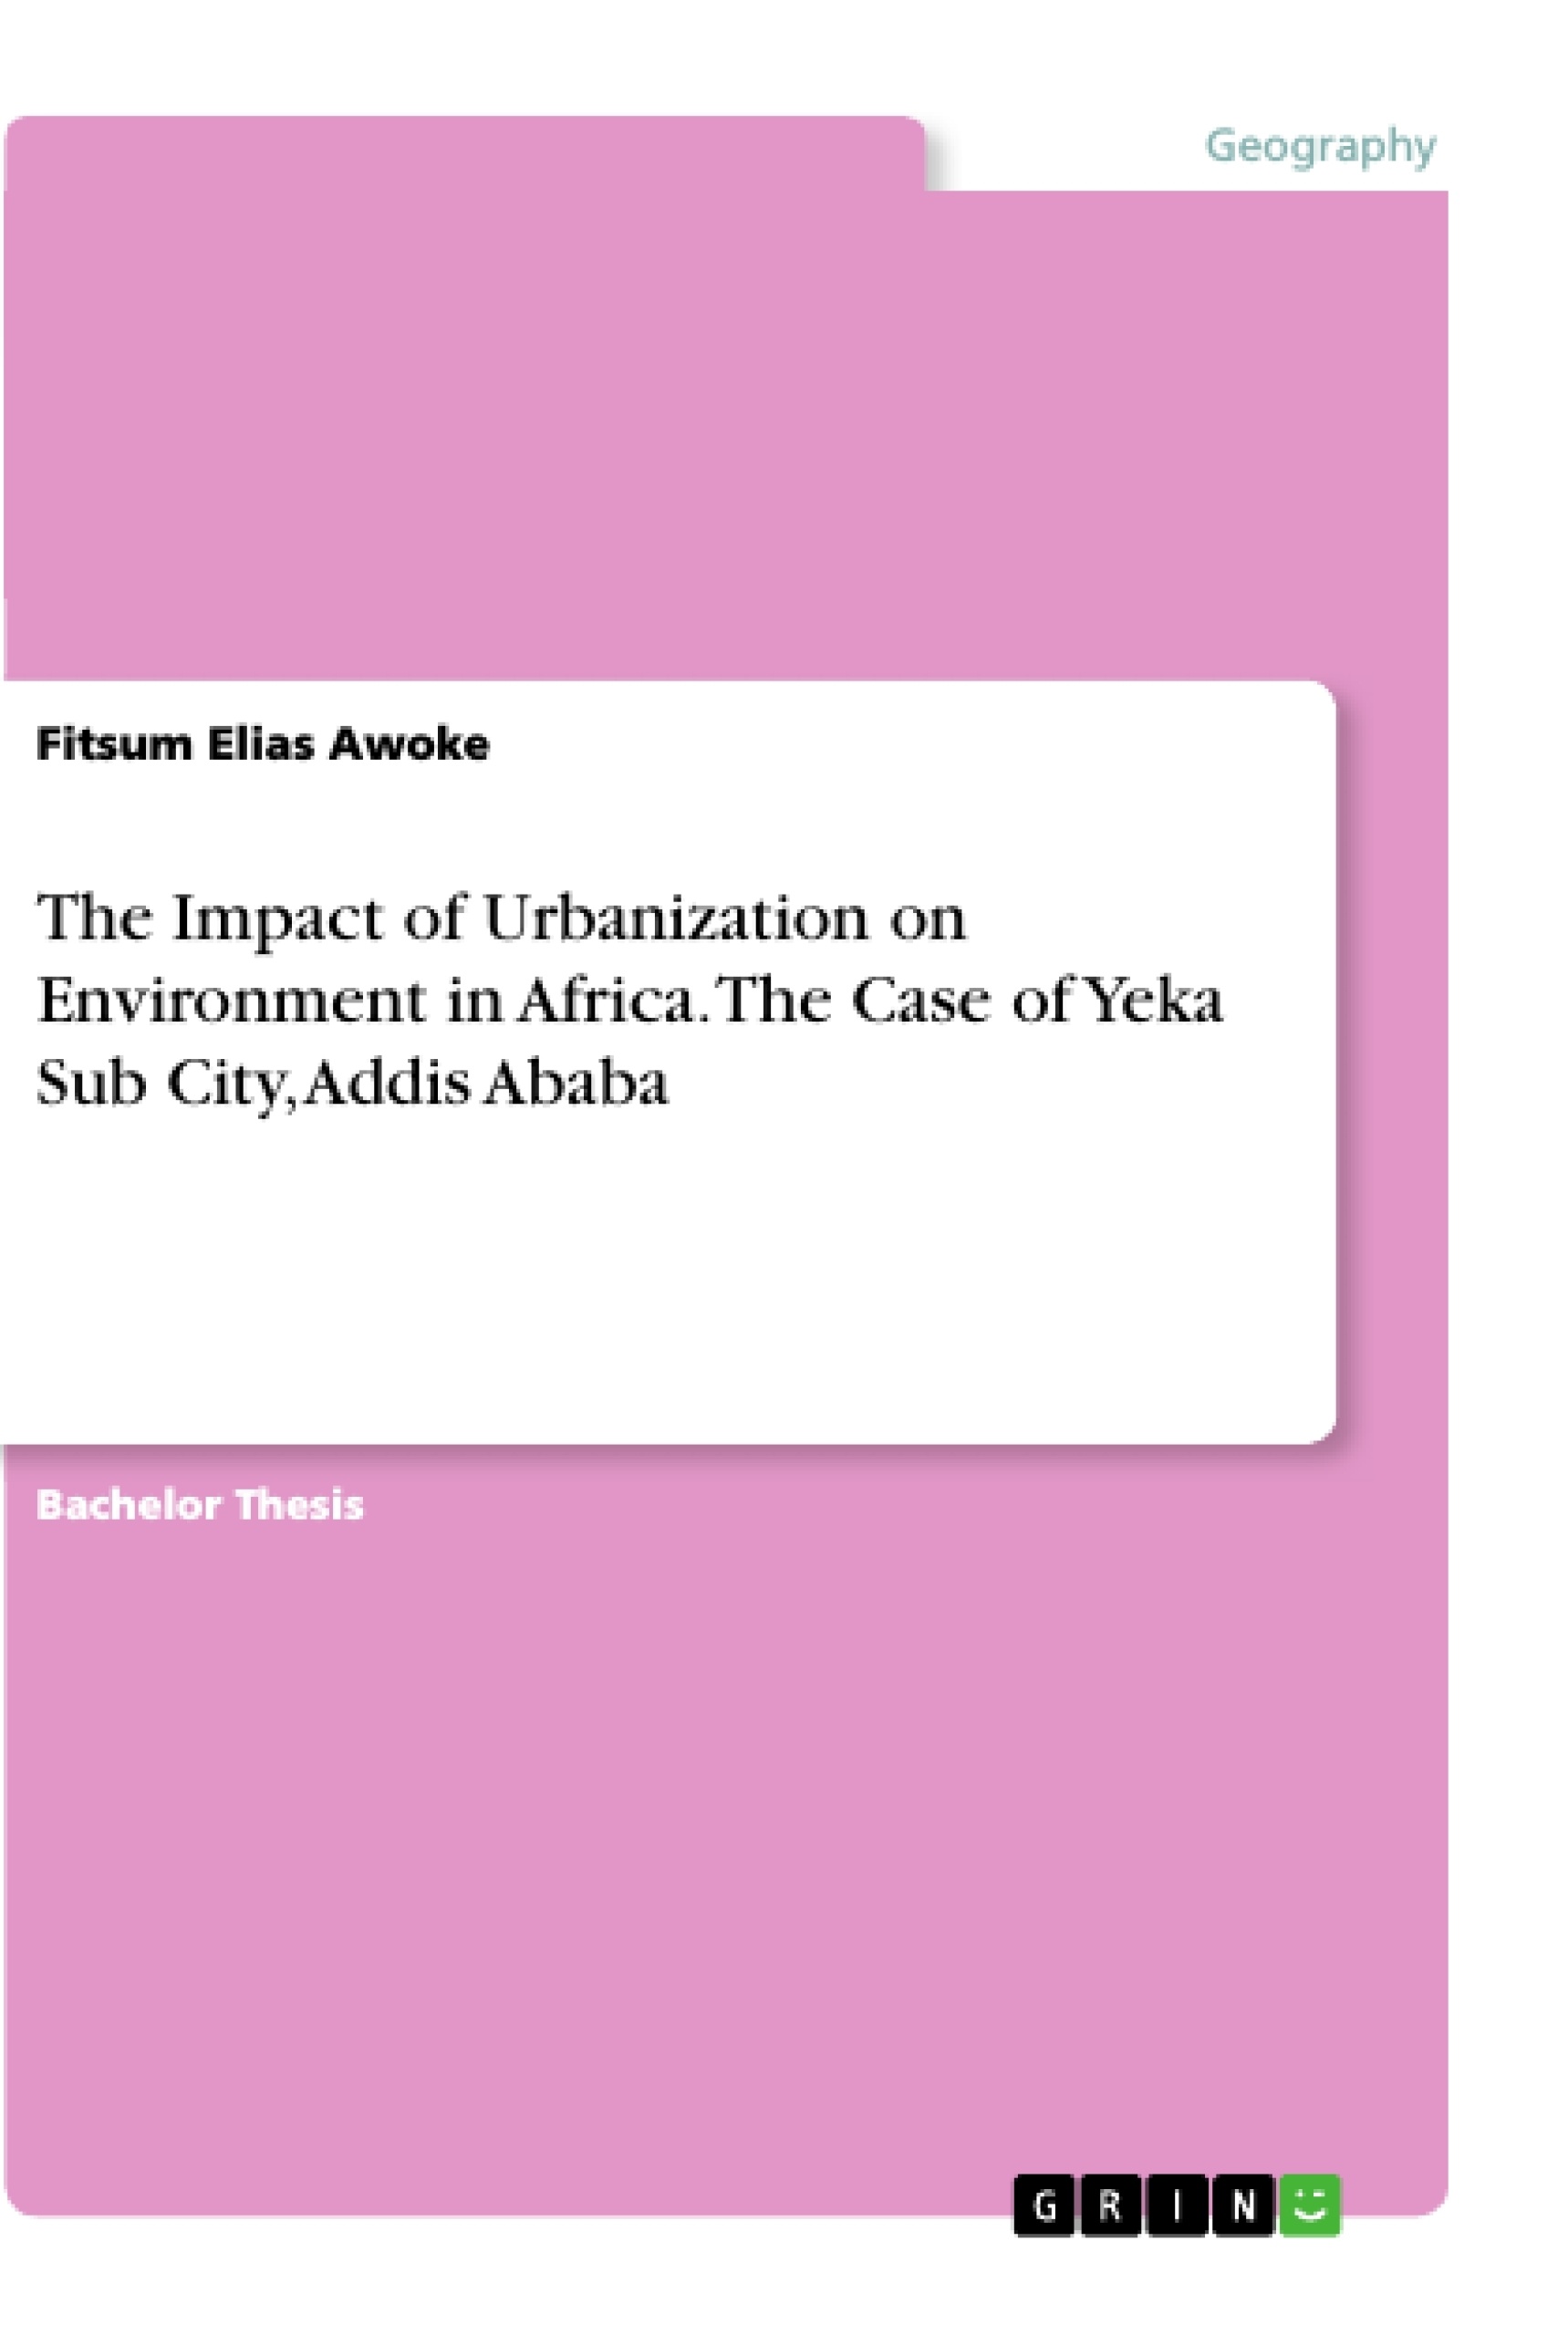 Título: The Impact of Urbanization on Environment in Africa. The Case of Yeka Sub City, Addis Ababa